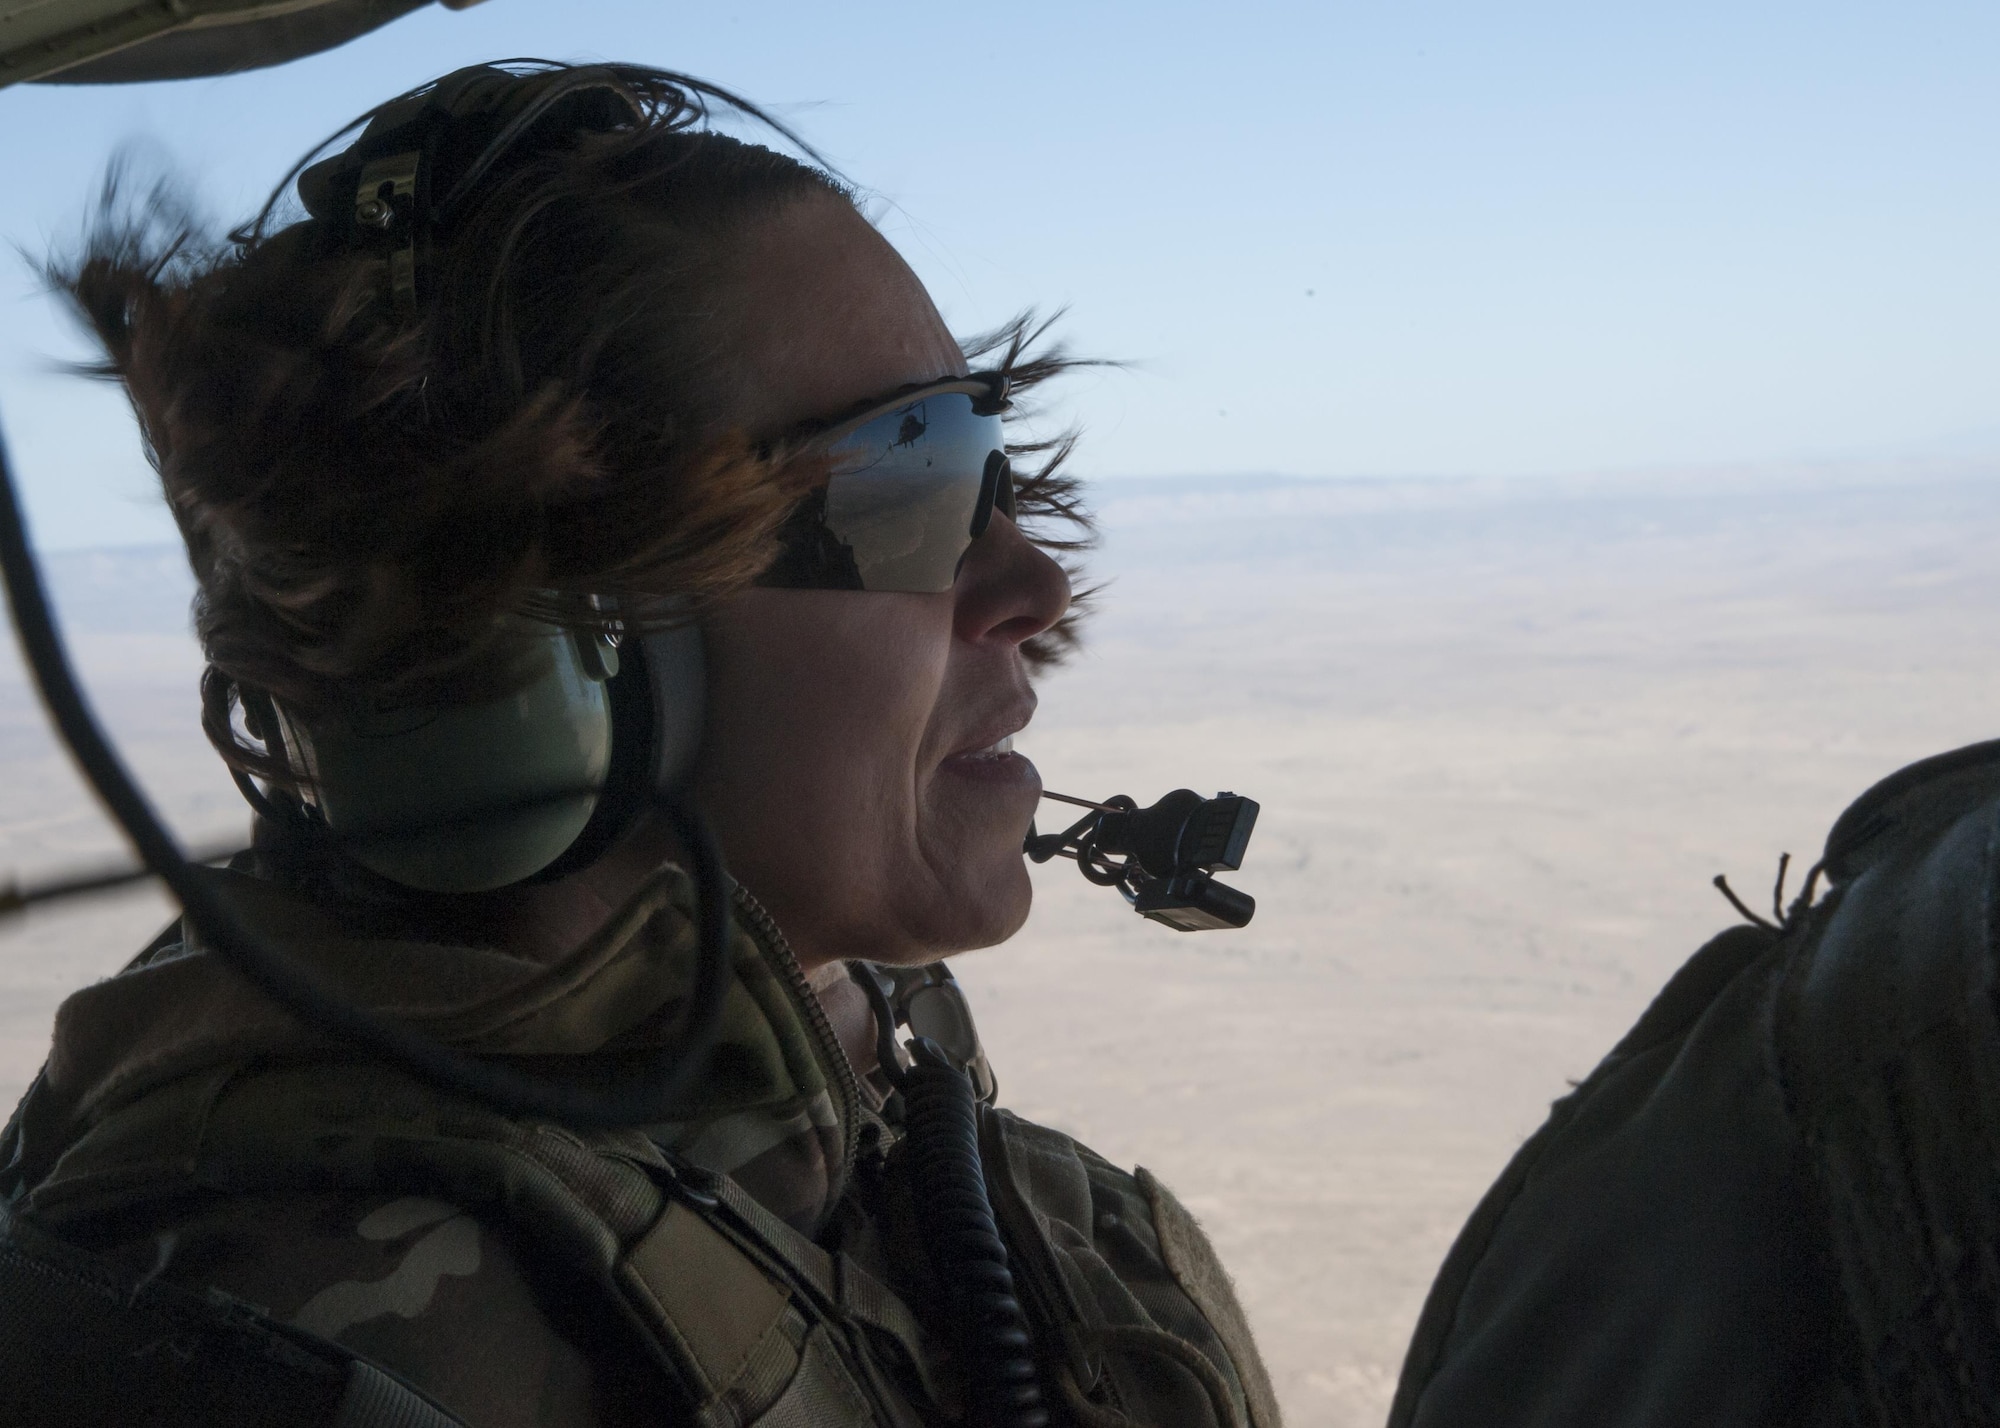 U.S. Air Force Chief Master Sgt. Juliet Gudgel, command chief master sergeant of Air Education and Training Command, watches an HH-60 Pave Hawk refueling training mission at Kirtland Air Force Base, N.M., Nov. 27, 2017. The chief went on four separate flights back-to-back in the course of six hours witnessing a refueling and drop mission in a C-130J, an aerial gunner training in an HH-60 Pave Hawk, hoist training in a CV-22 Osprey and a rescue hoist mission in UH-1H Huey. (U.S. Air Force photo by Staff Sgt. J.D. Strong II)